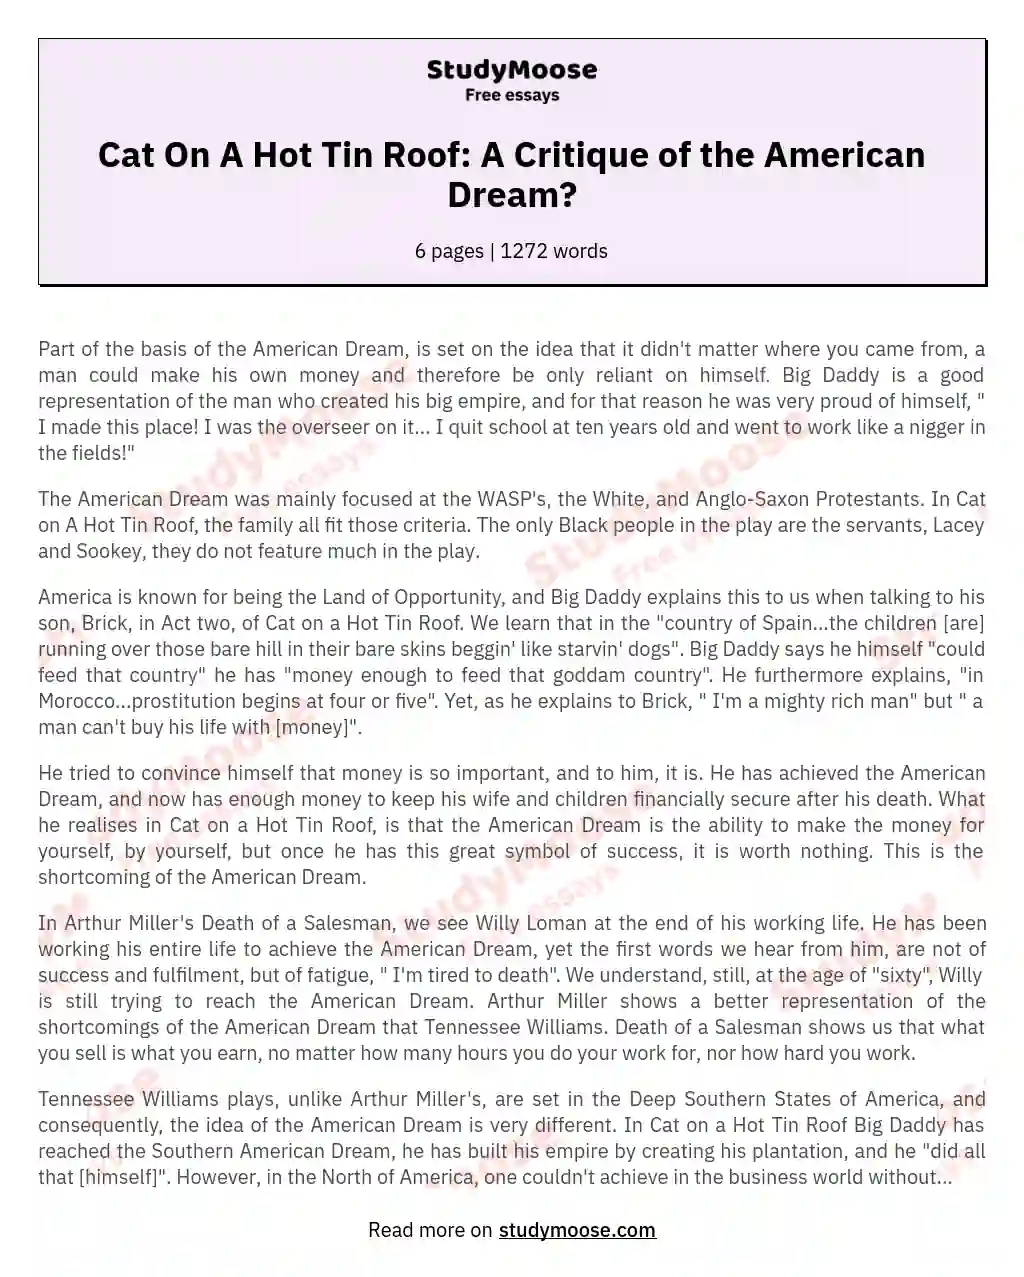 To What Extent is Cat On A Hot Tin Roof a representative of the Shortcomings of the American Dream?